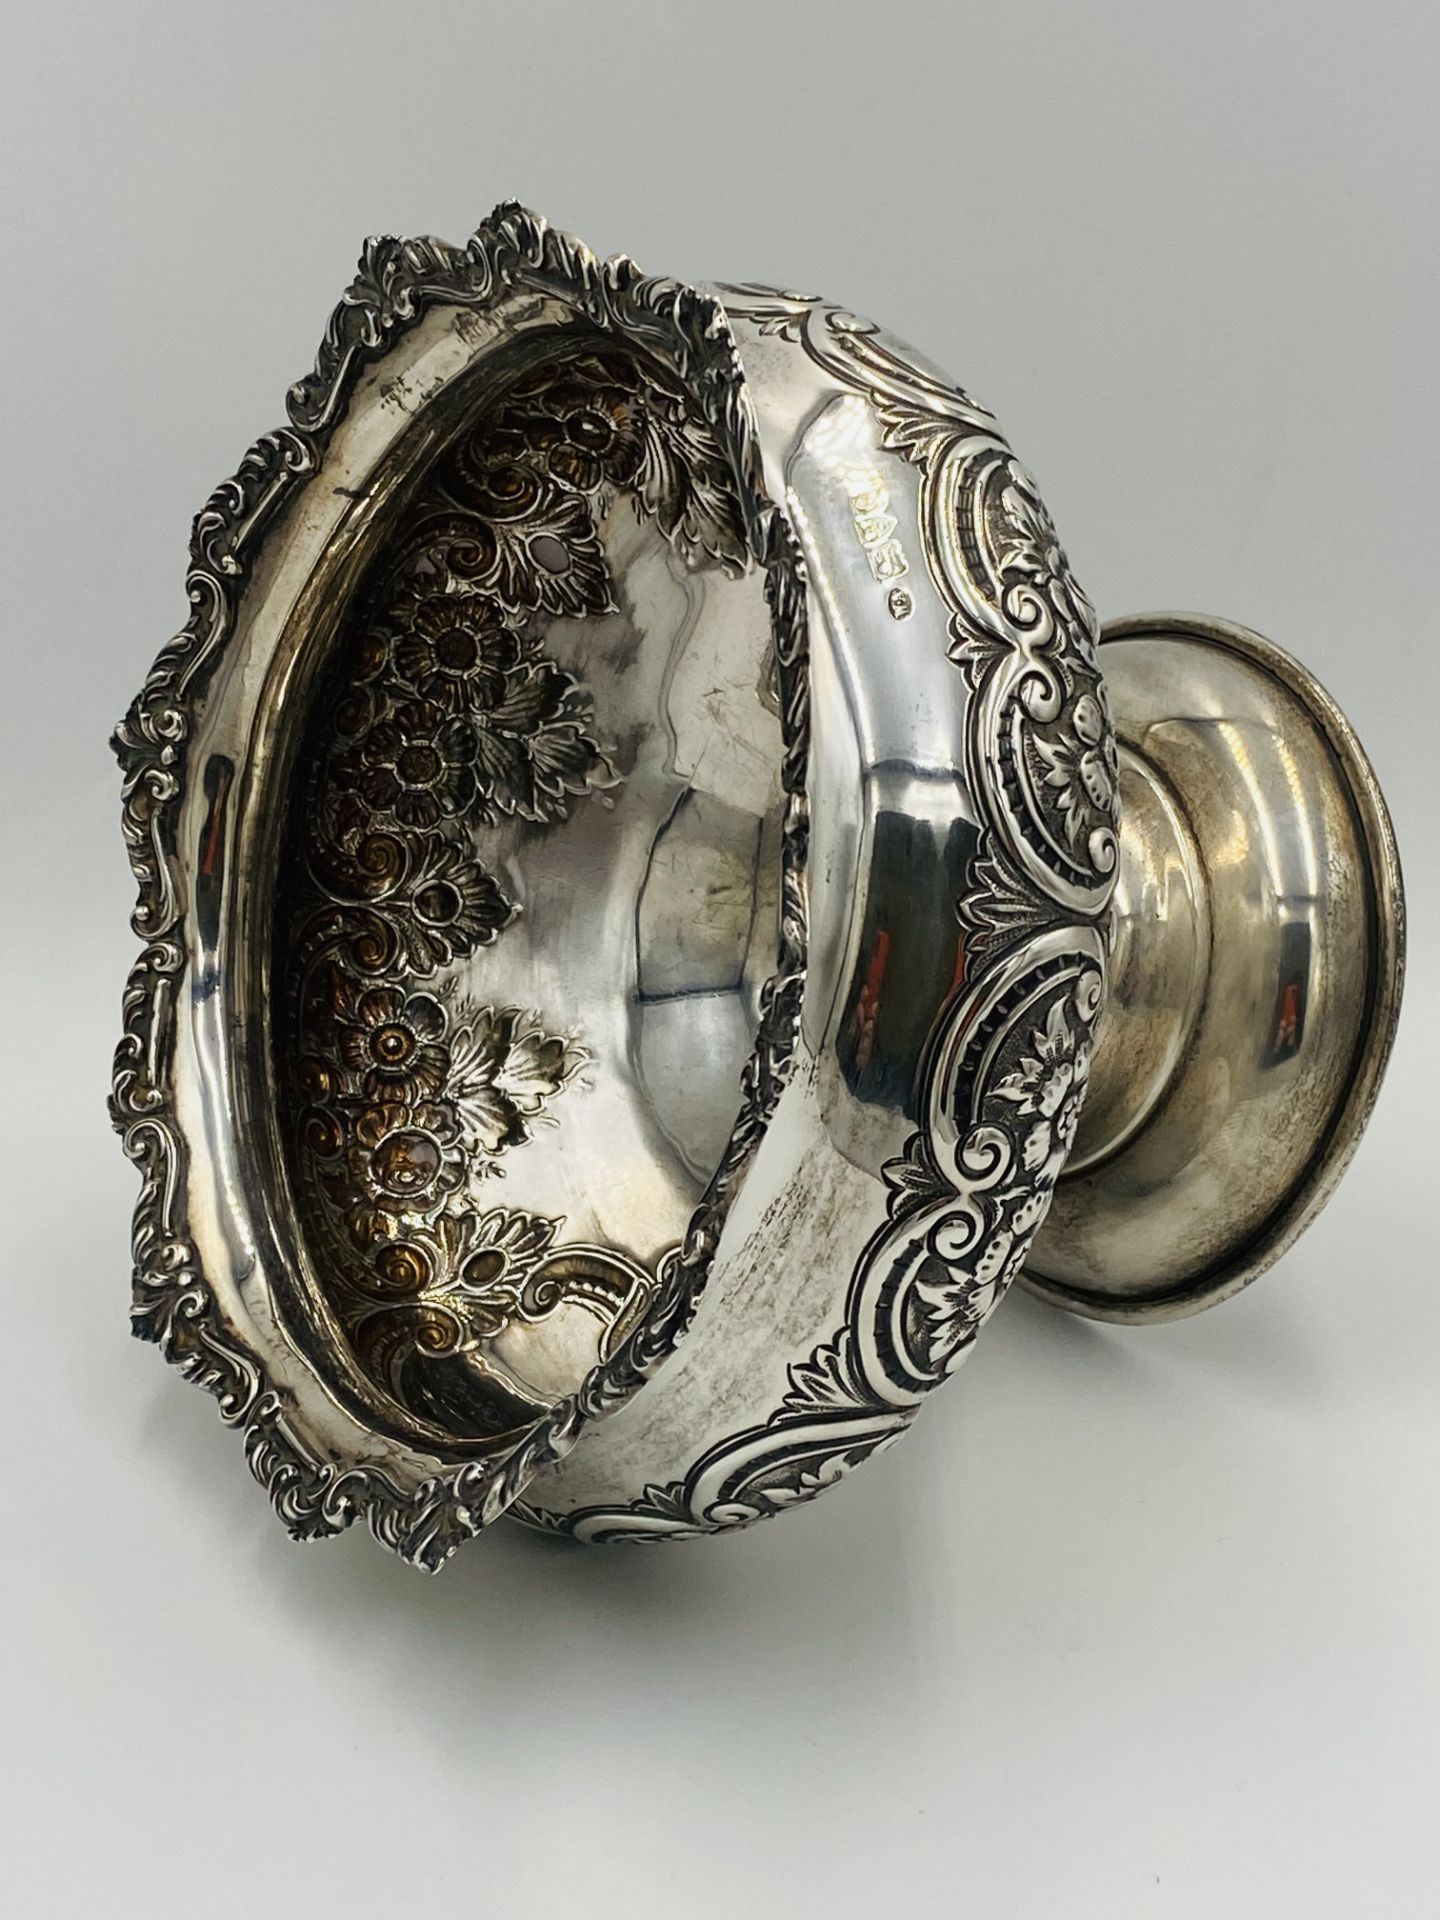 Silver bowl with repousse decoration - Image 5 of 9